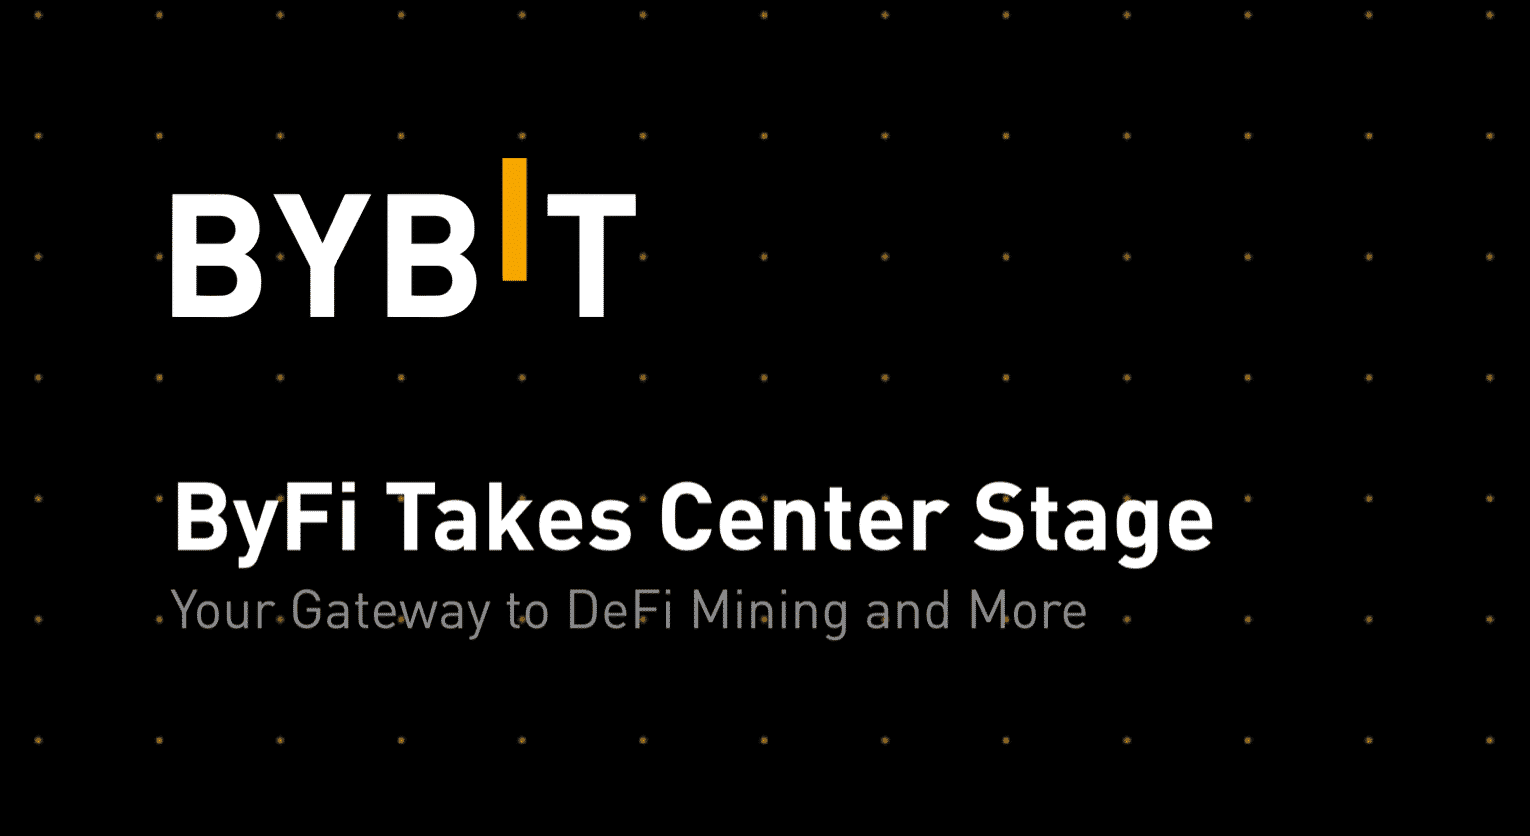 The Bybit Exchange and ByFi, the Gateway to DeFi